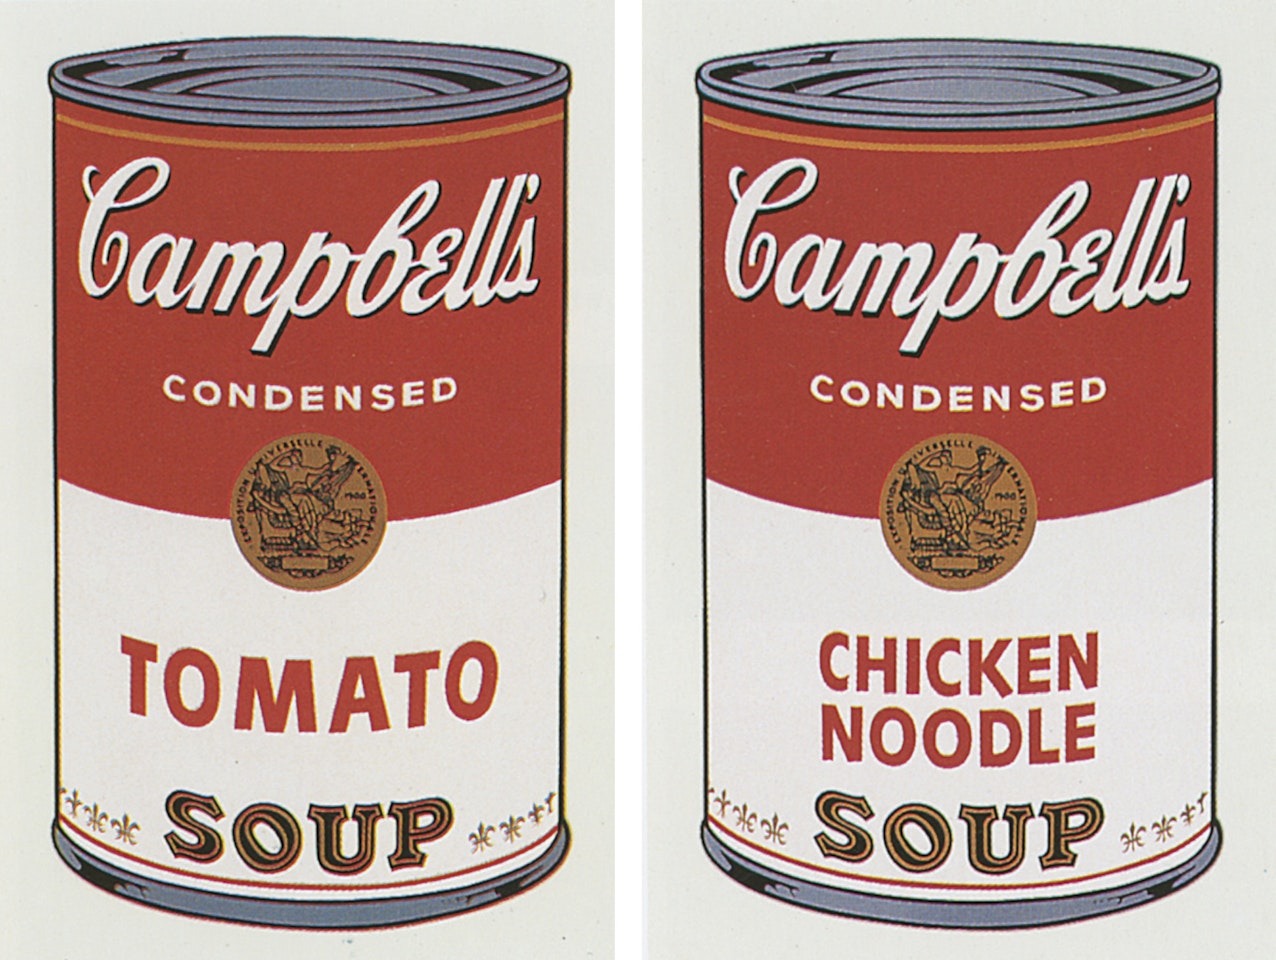 CAMPBELL'S SOUP I (F. & S. II.44-53) by Andy Warhol